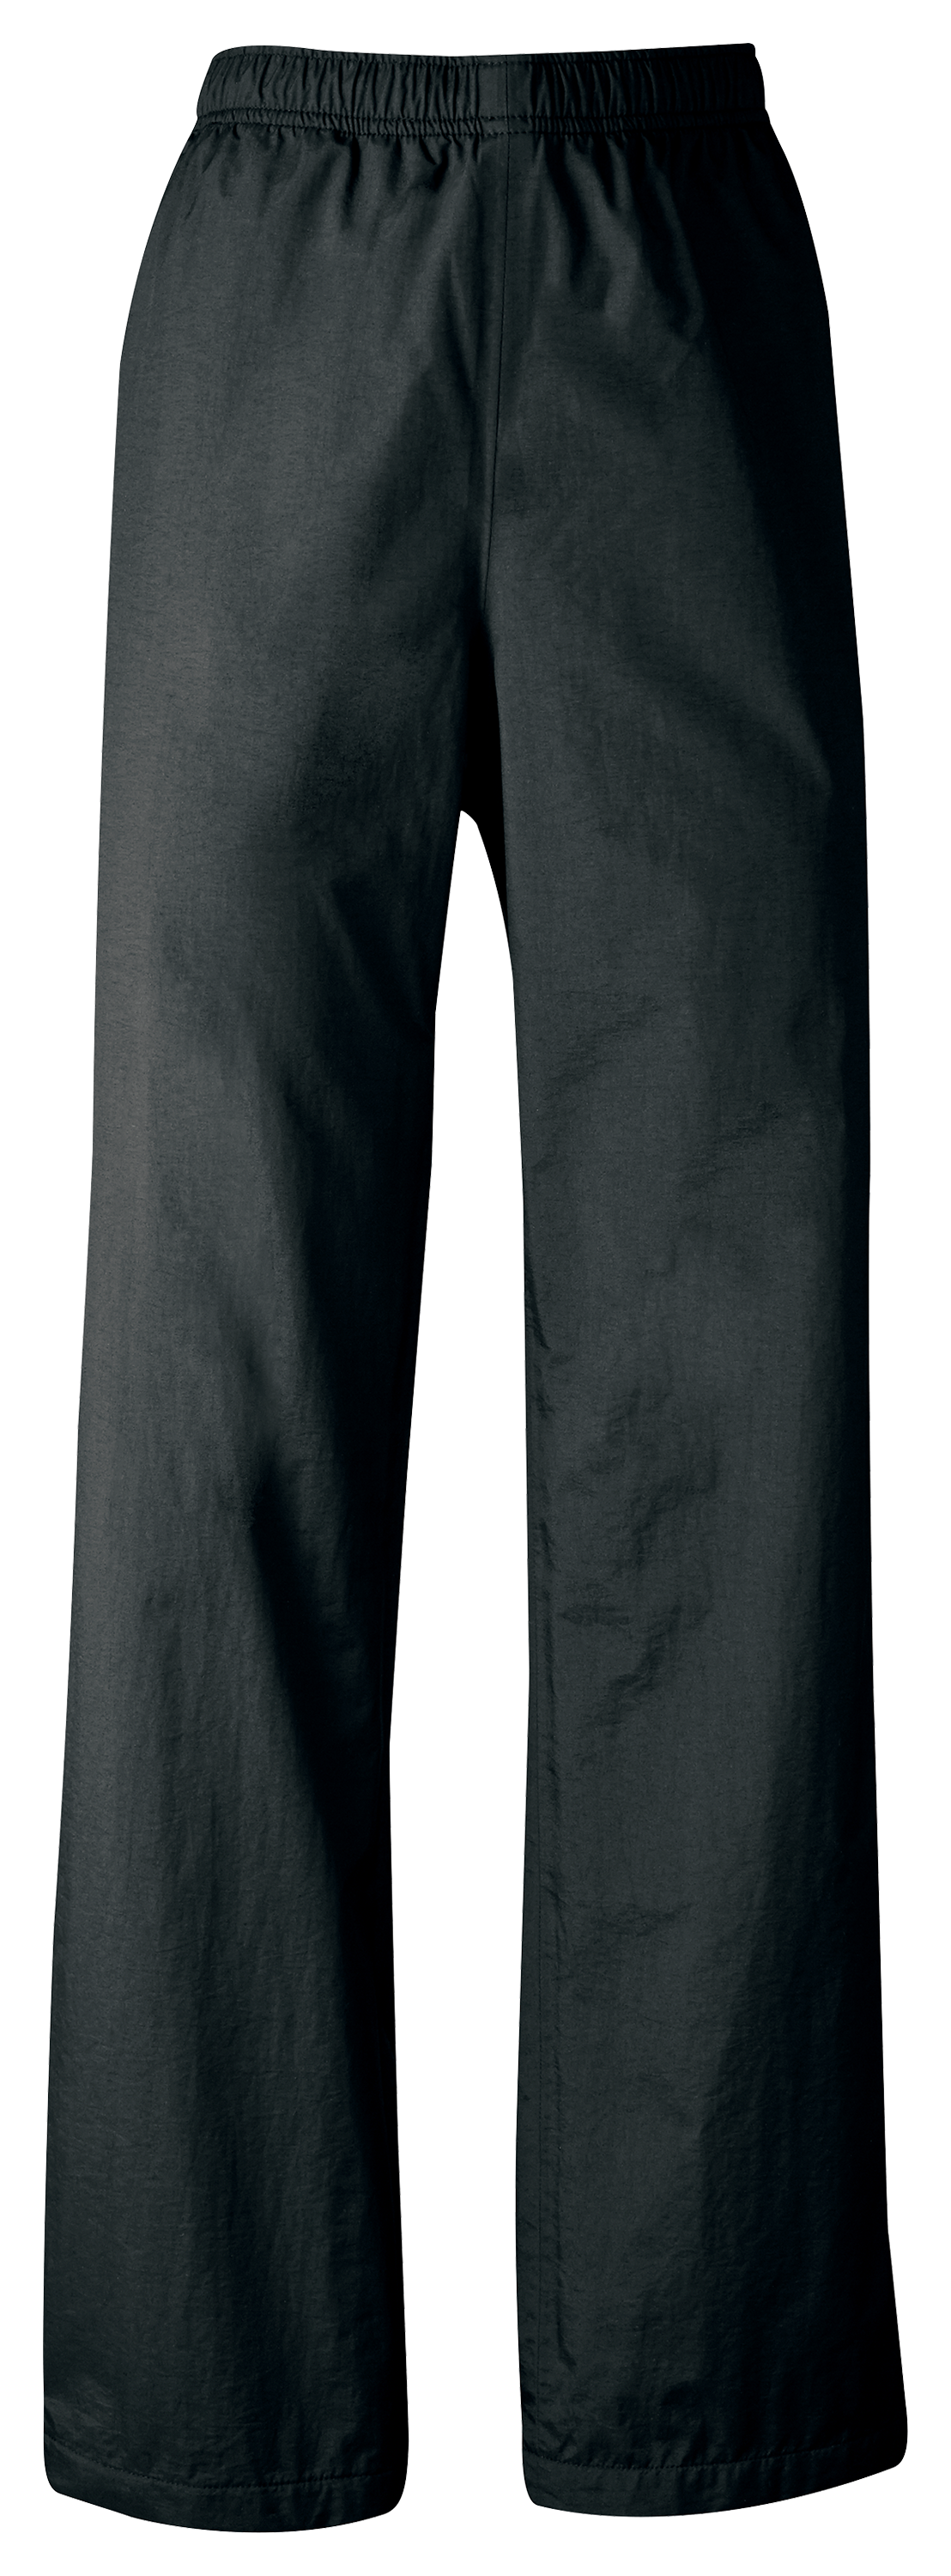 Guidewear Rain Stopper Pants with 4MOST REPEL for Ladies